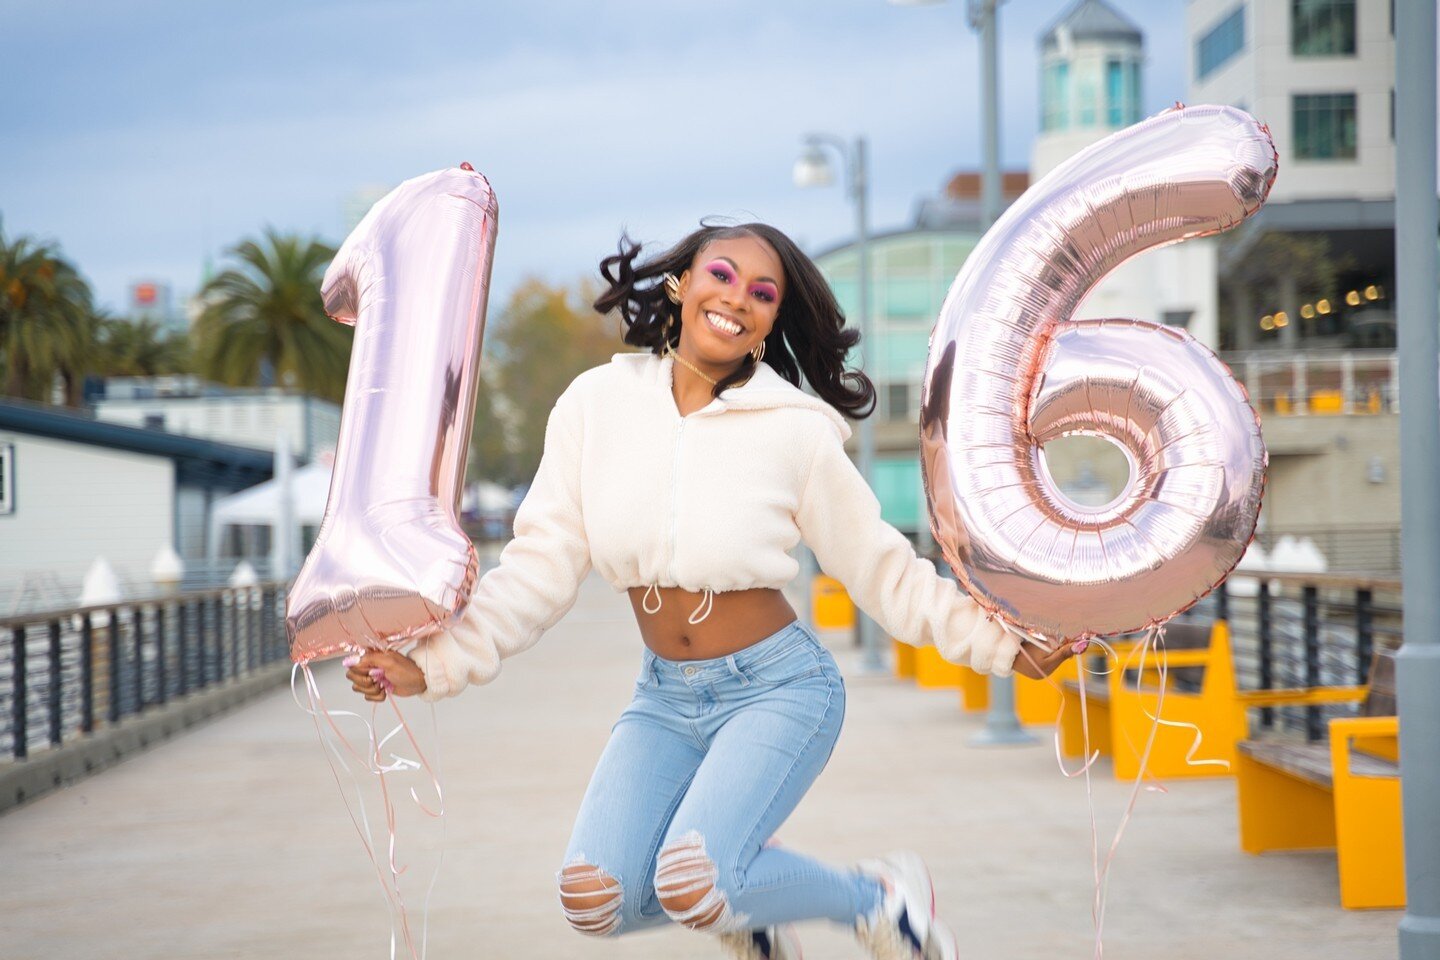 It's never too late to schedule a Photoshoot for the special days in your life, like my niece's birthday!!!⁠
Make Memories Last Forever.⁠
#instagood #photography #photographer #cityscape #landscape #instagood #justgoshoot #love #beautiful #happy #sum